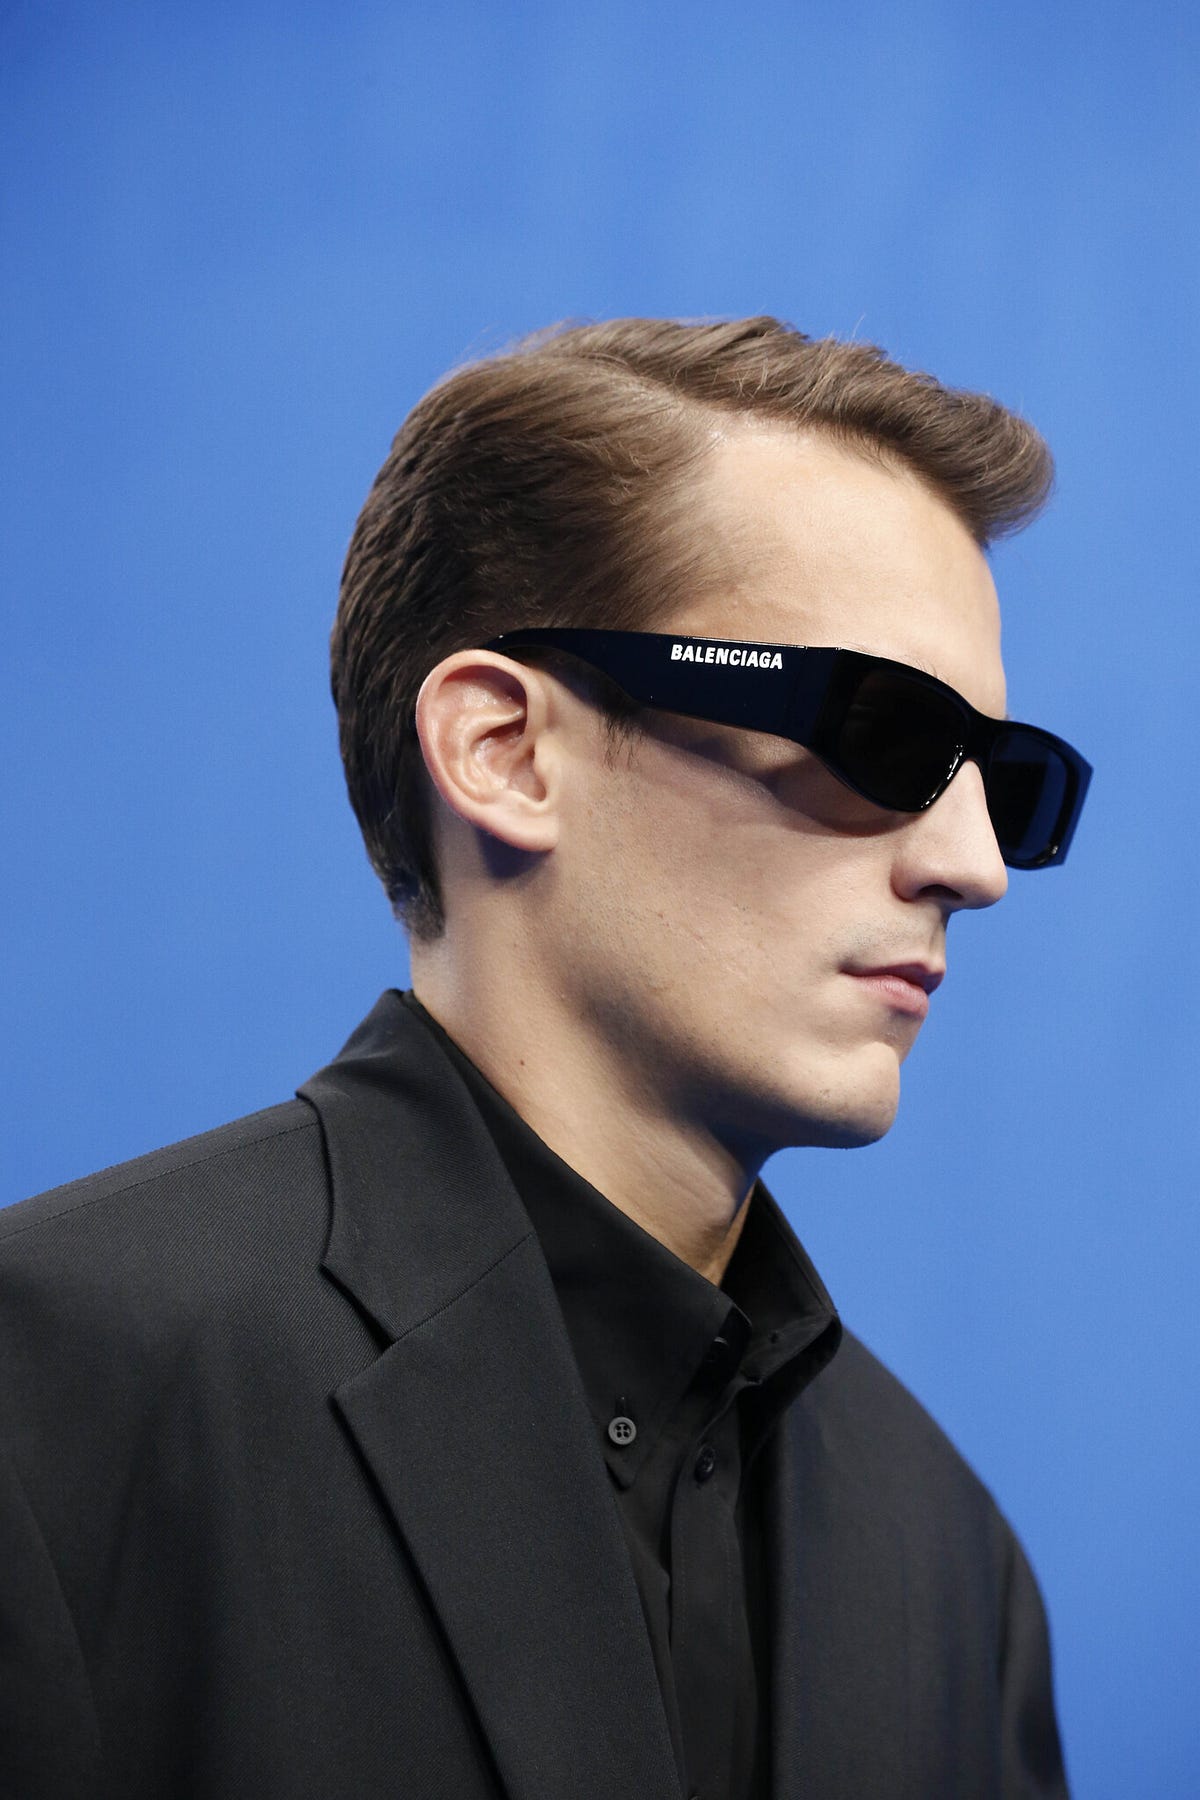 Balenciaga Launches the New LED Frame Sunglasses During Summer 20 Fashion  Show | by The New York Exclusive by Columnist, Tony Bowles | Medium